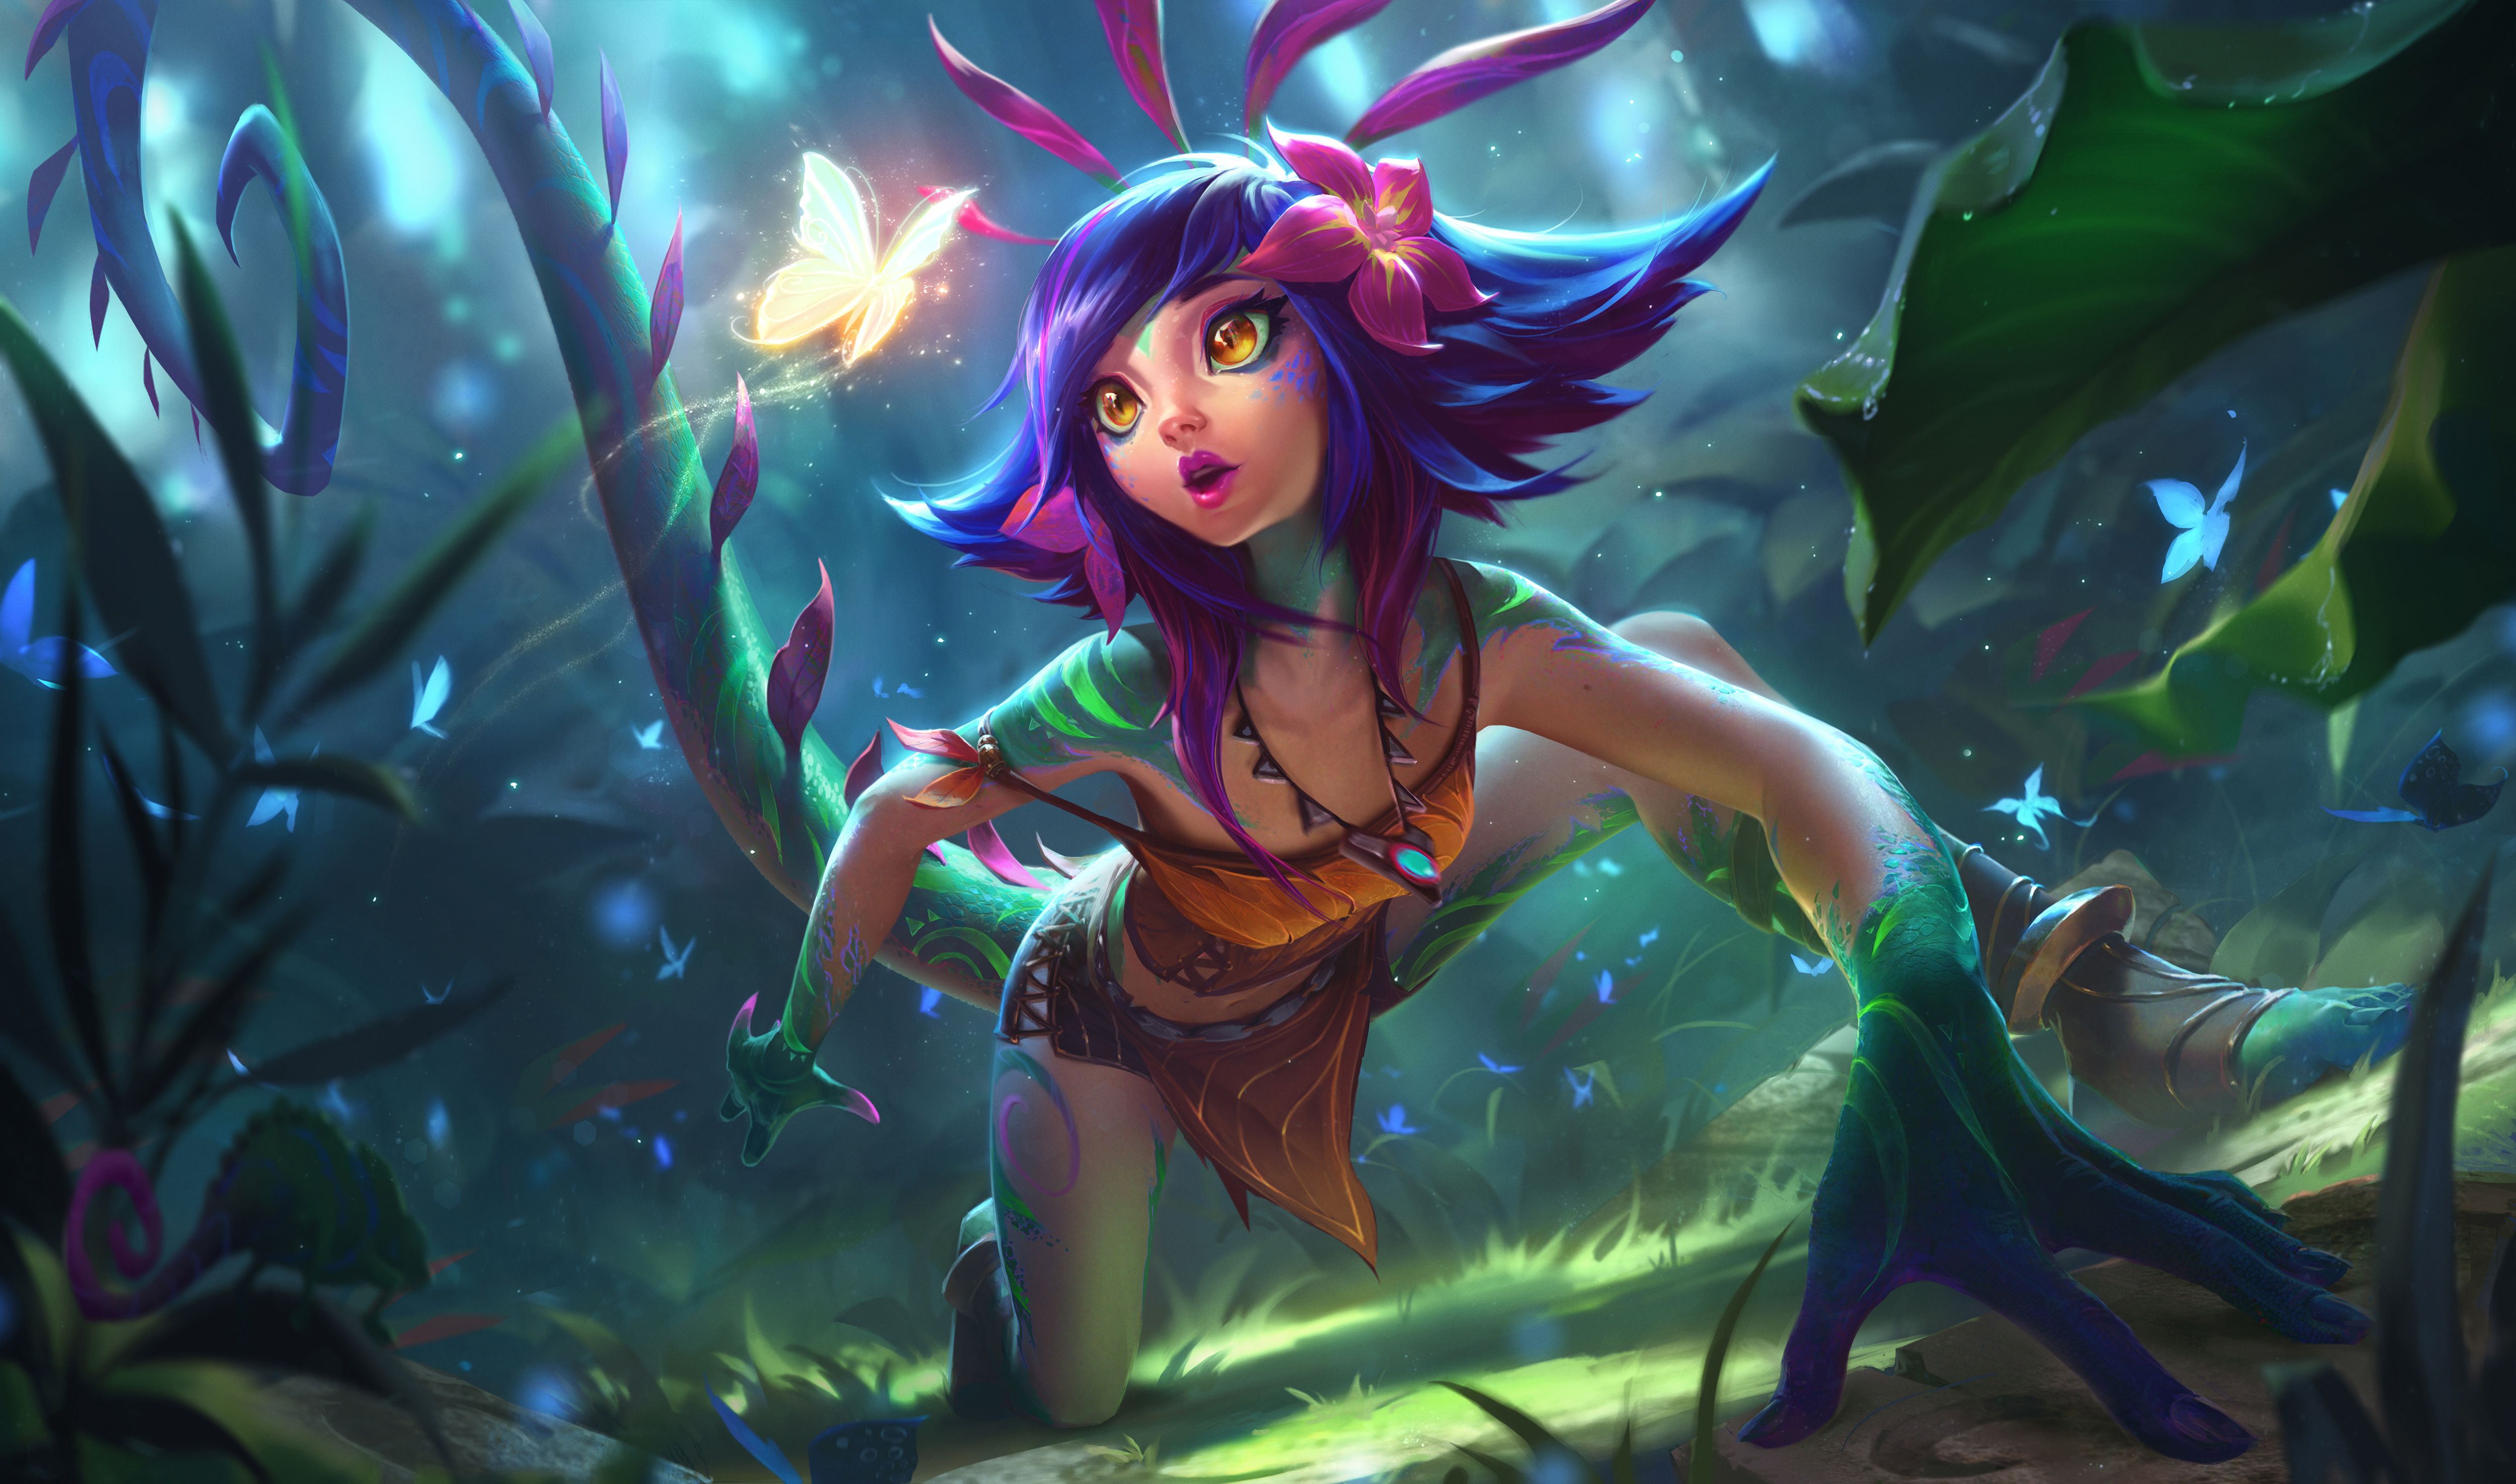 Neeko Wallpapers Wallpaper Cave These cute and girly wallpapers represent the sensitive and artistic nature of a woman. neeko wallpapers wallpaper cave